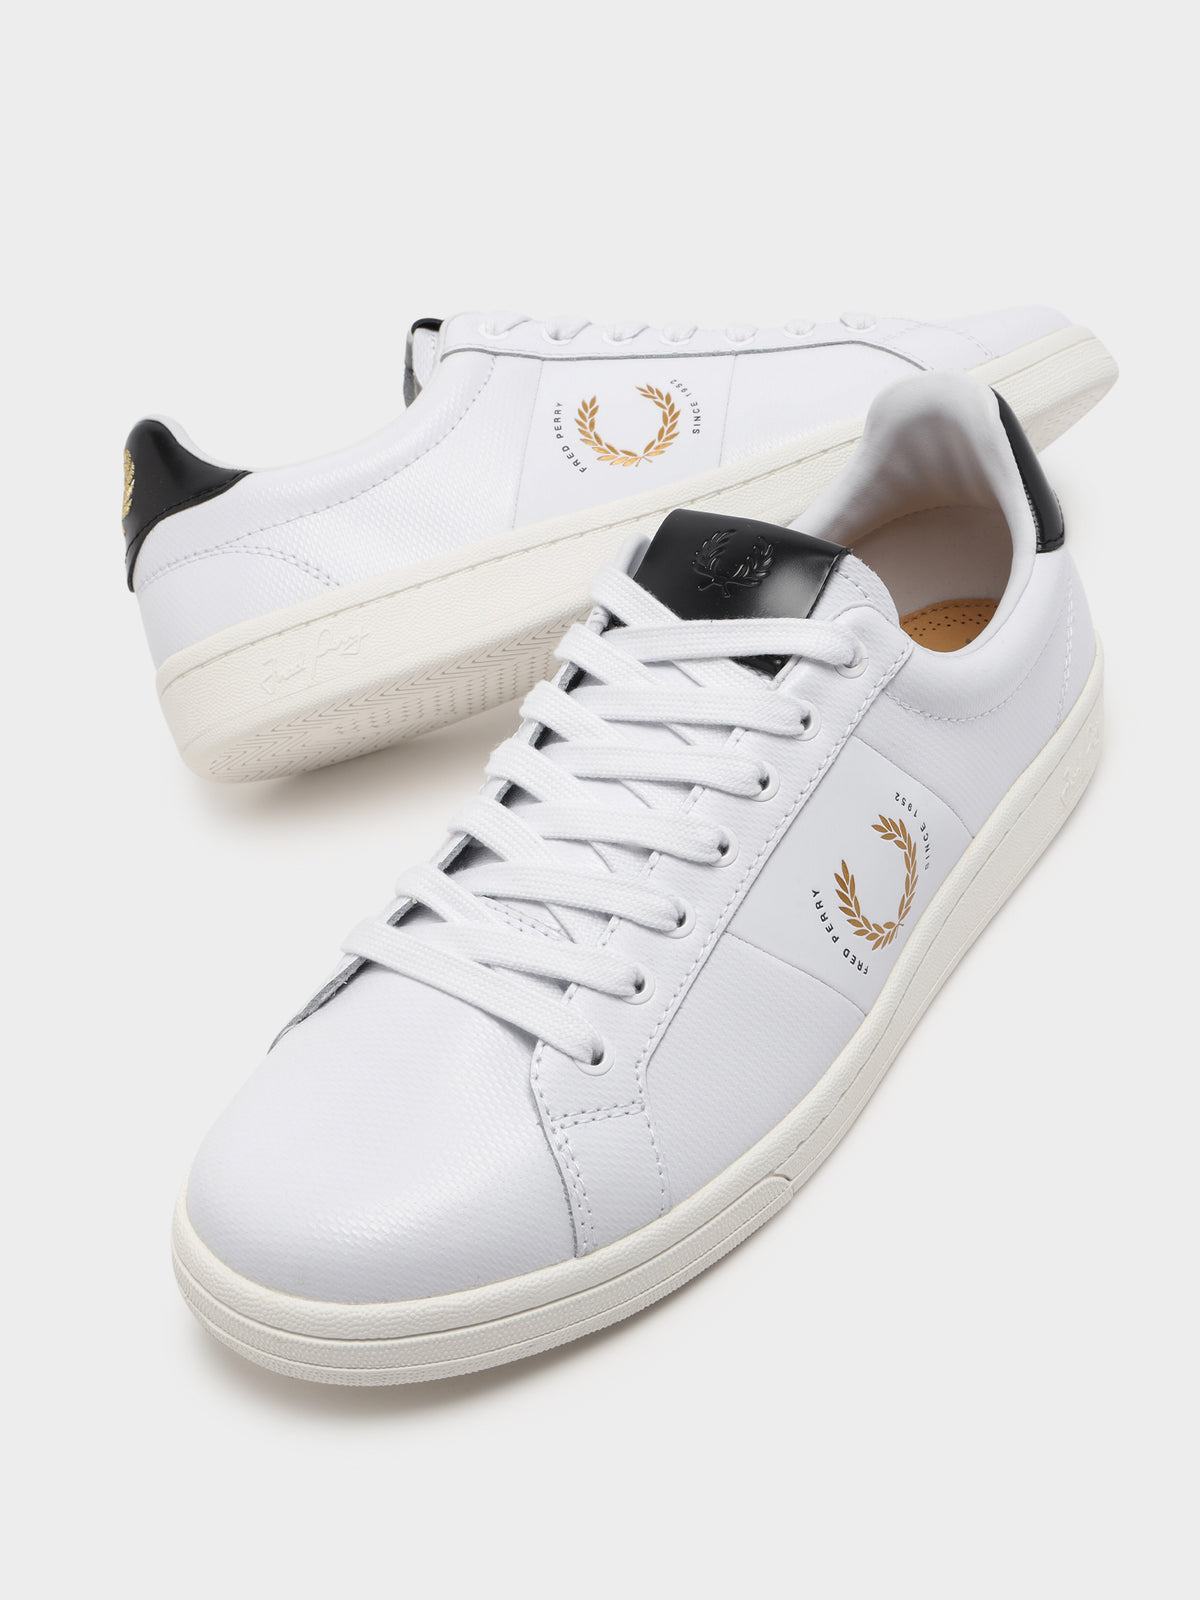 Mens B721 Pique Leather Sneaker in White